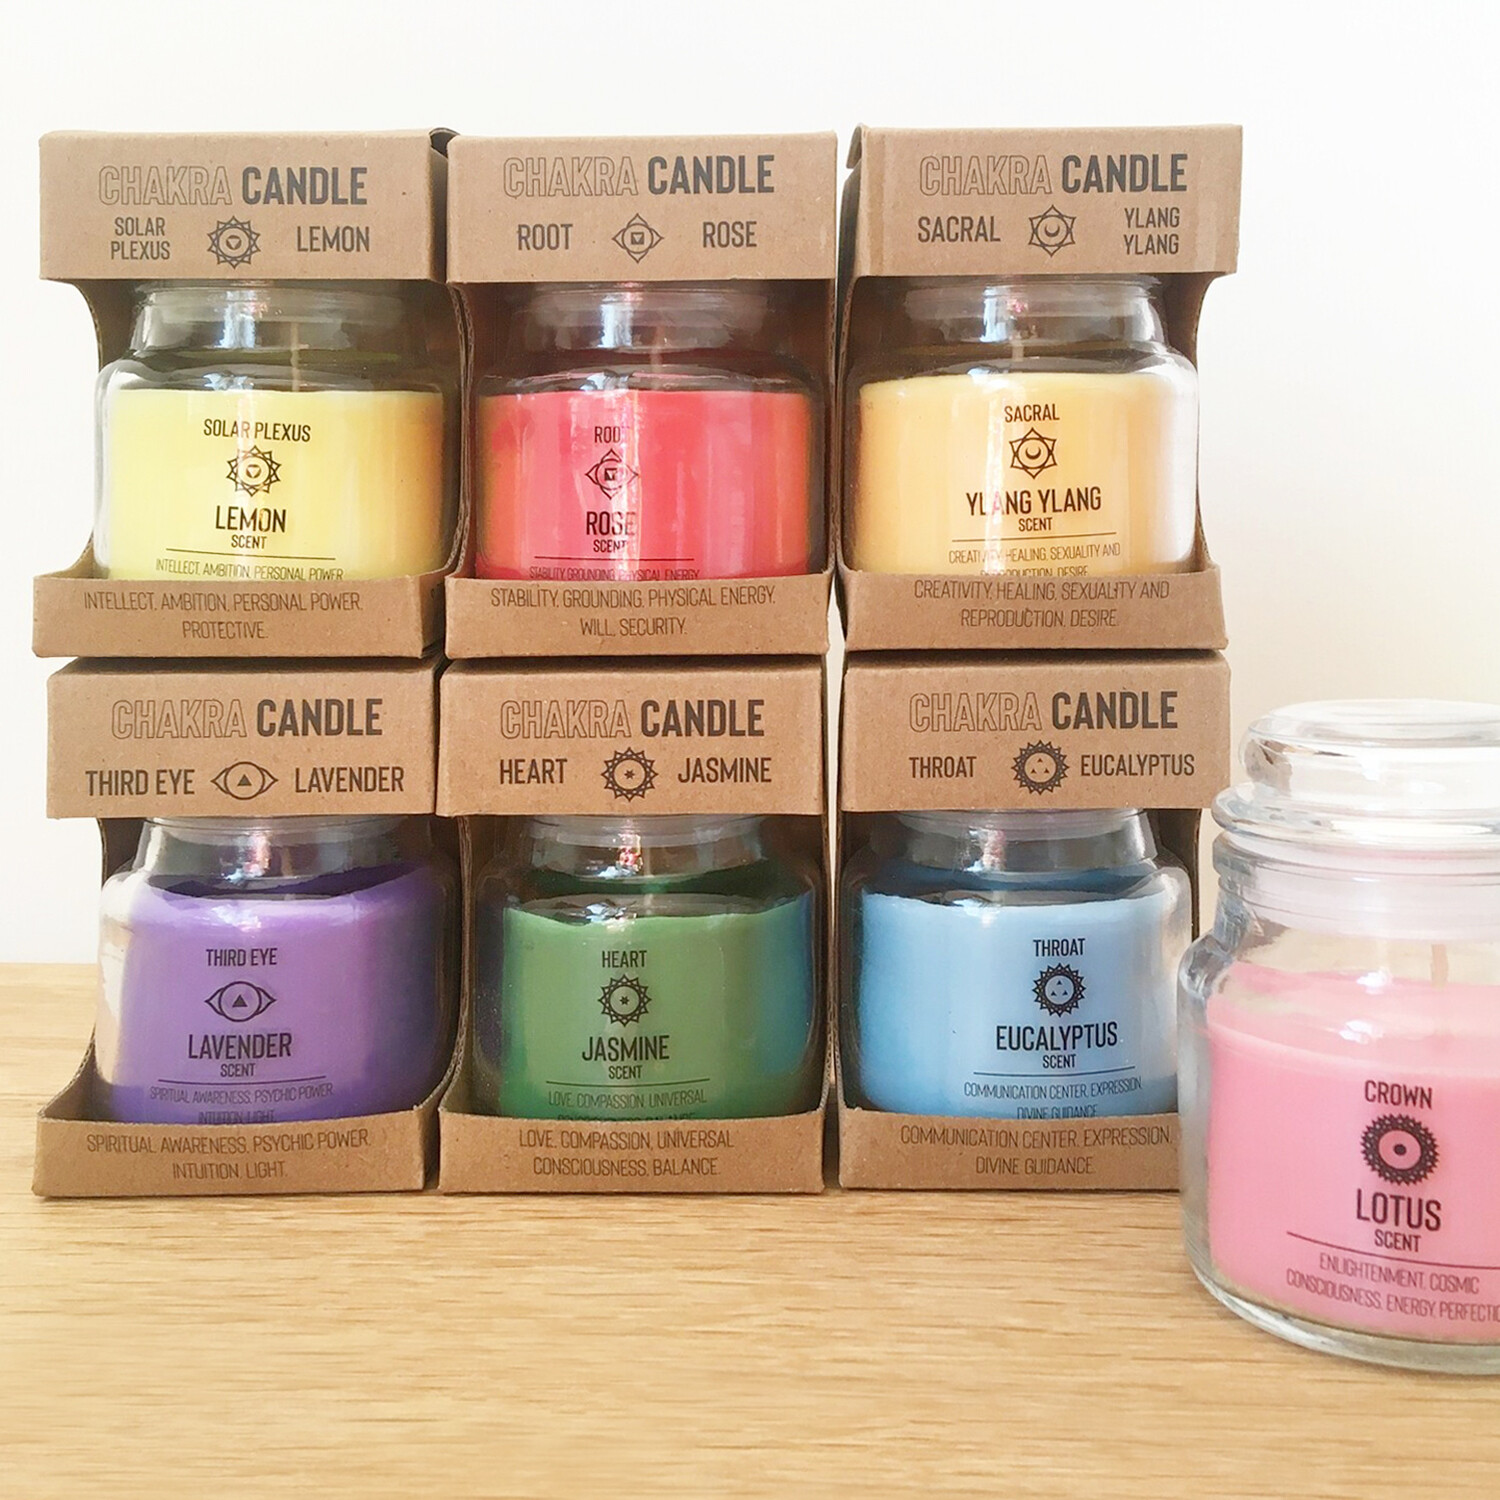 Throat Chakra Scented 9cm Candle Eucalyptus Scent